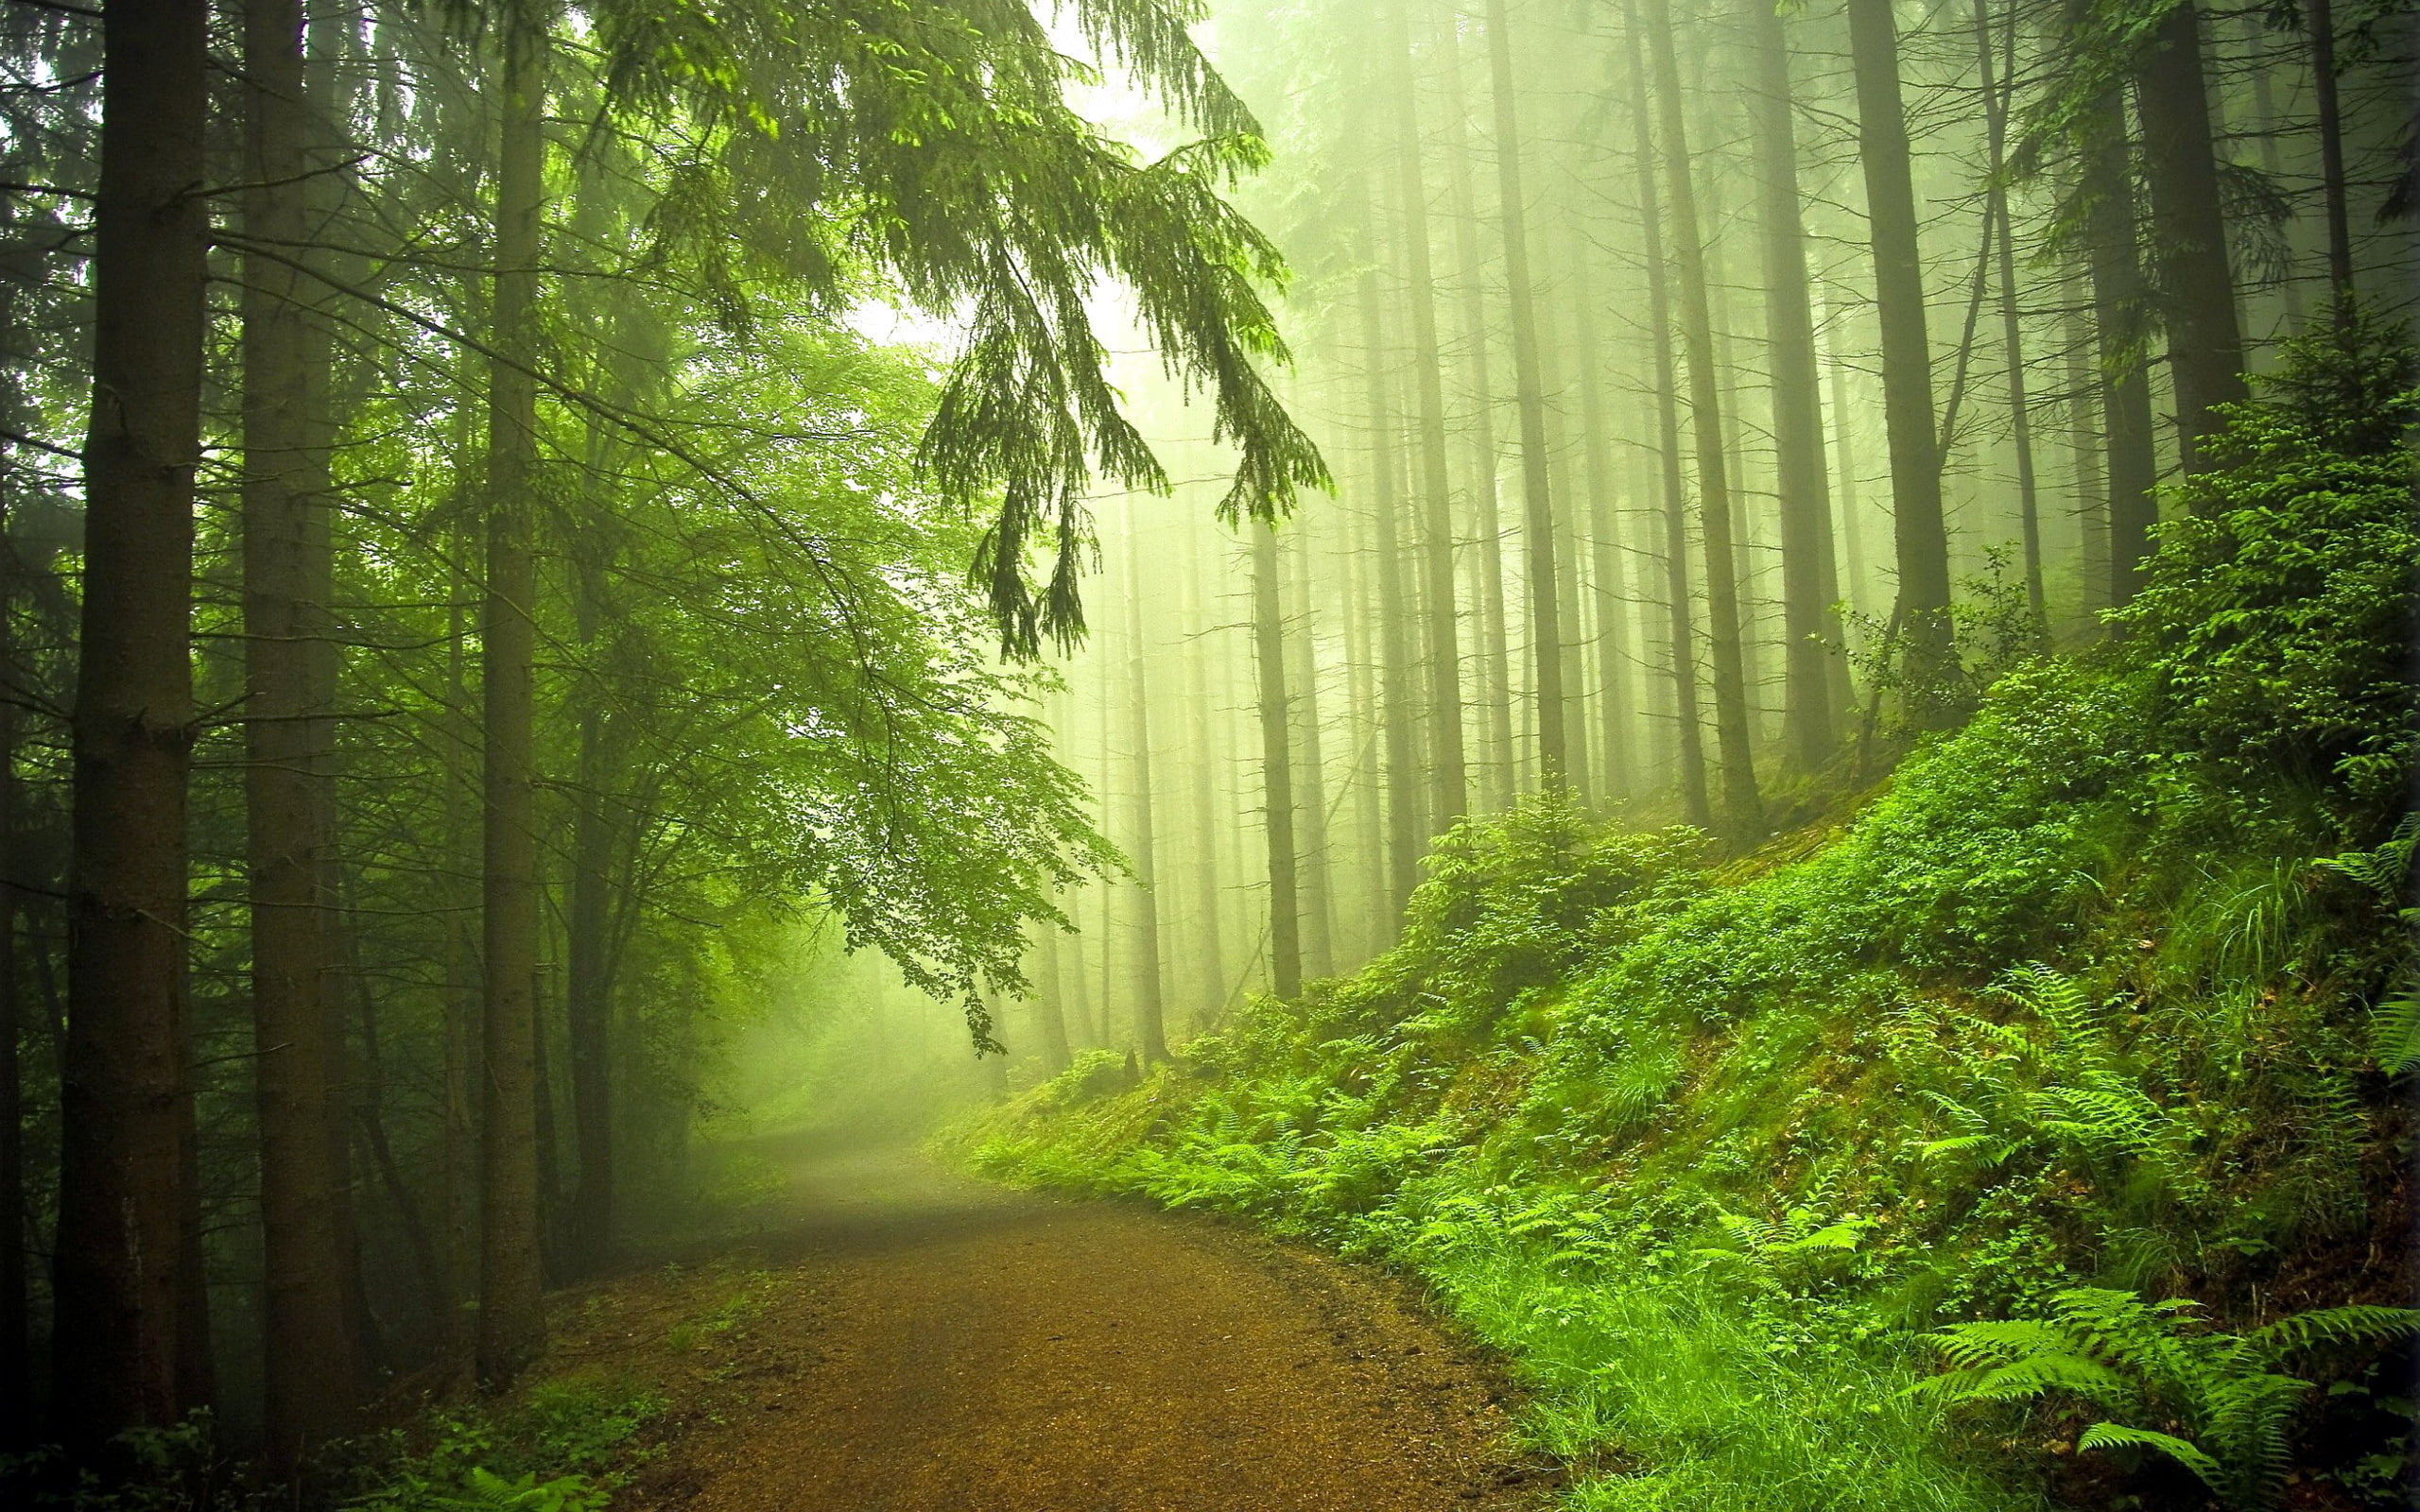 Early Morning Forest, green leafed trees, Nature, Scenery, fog